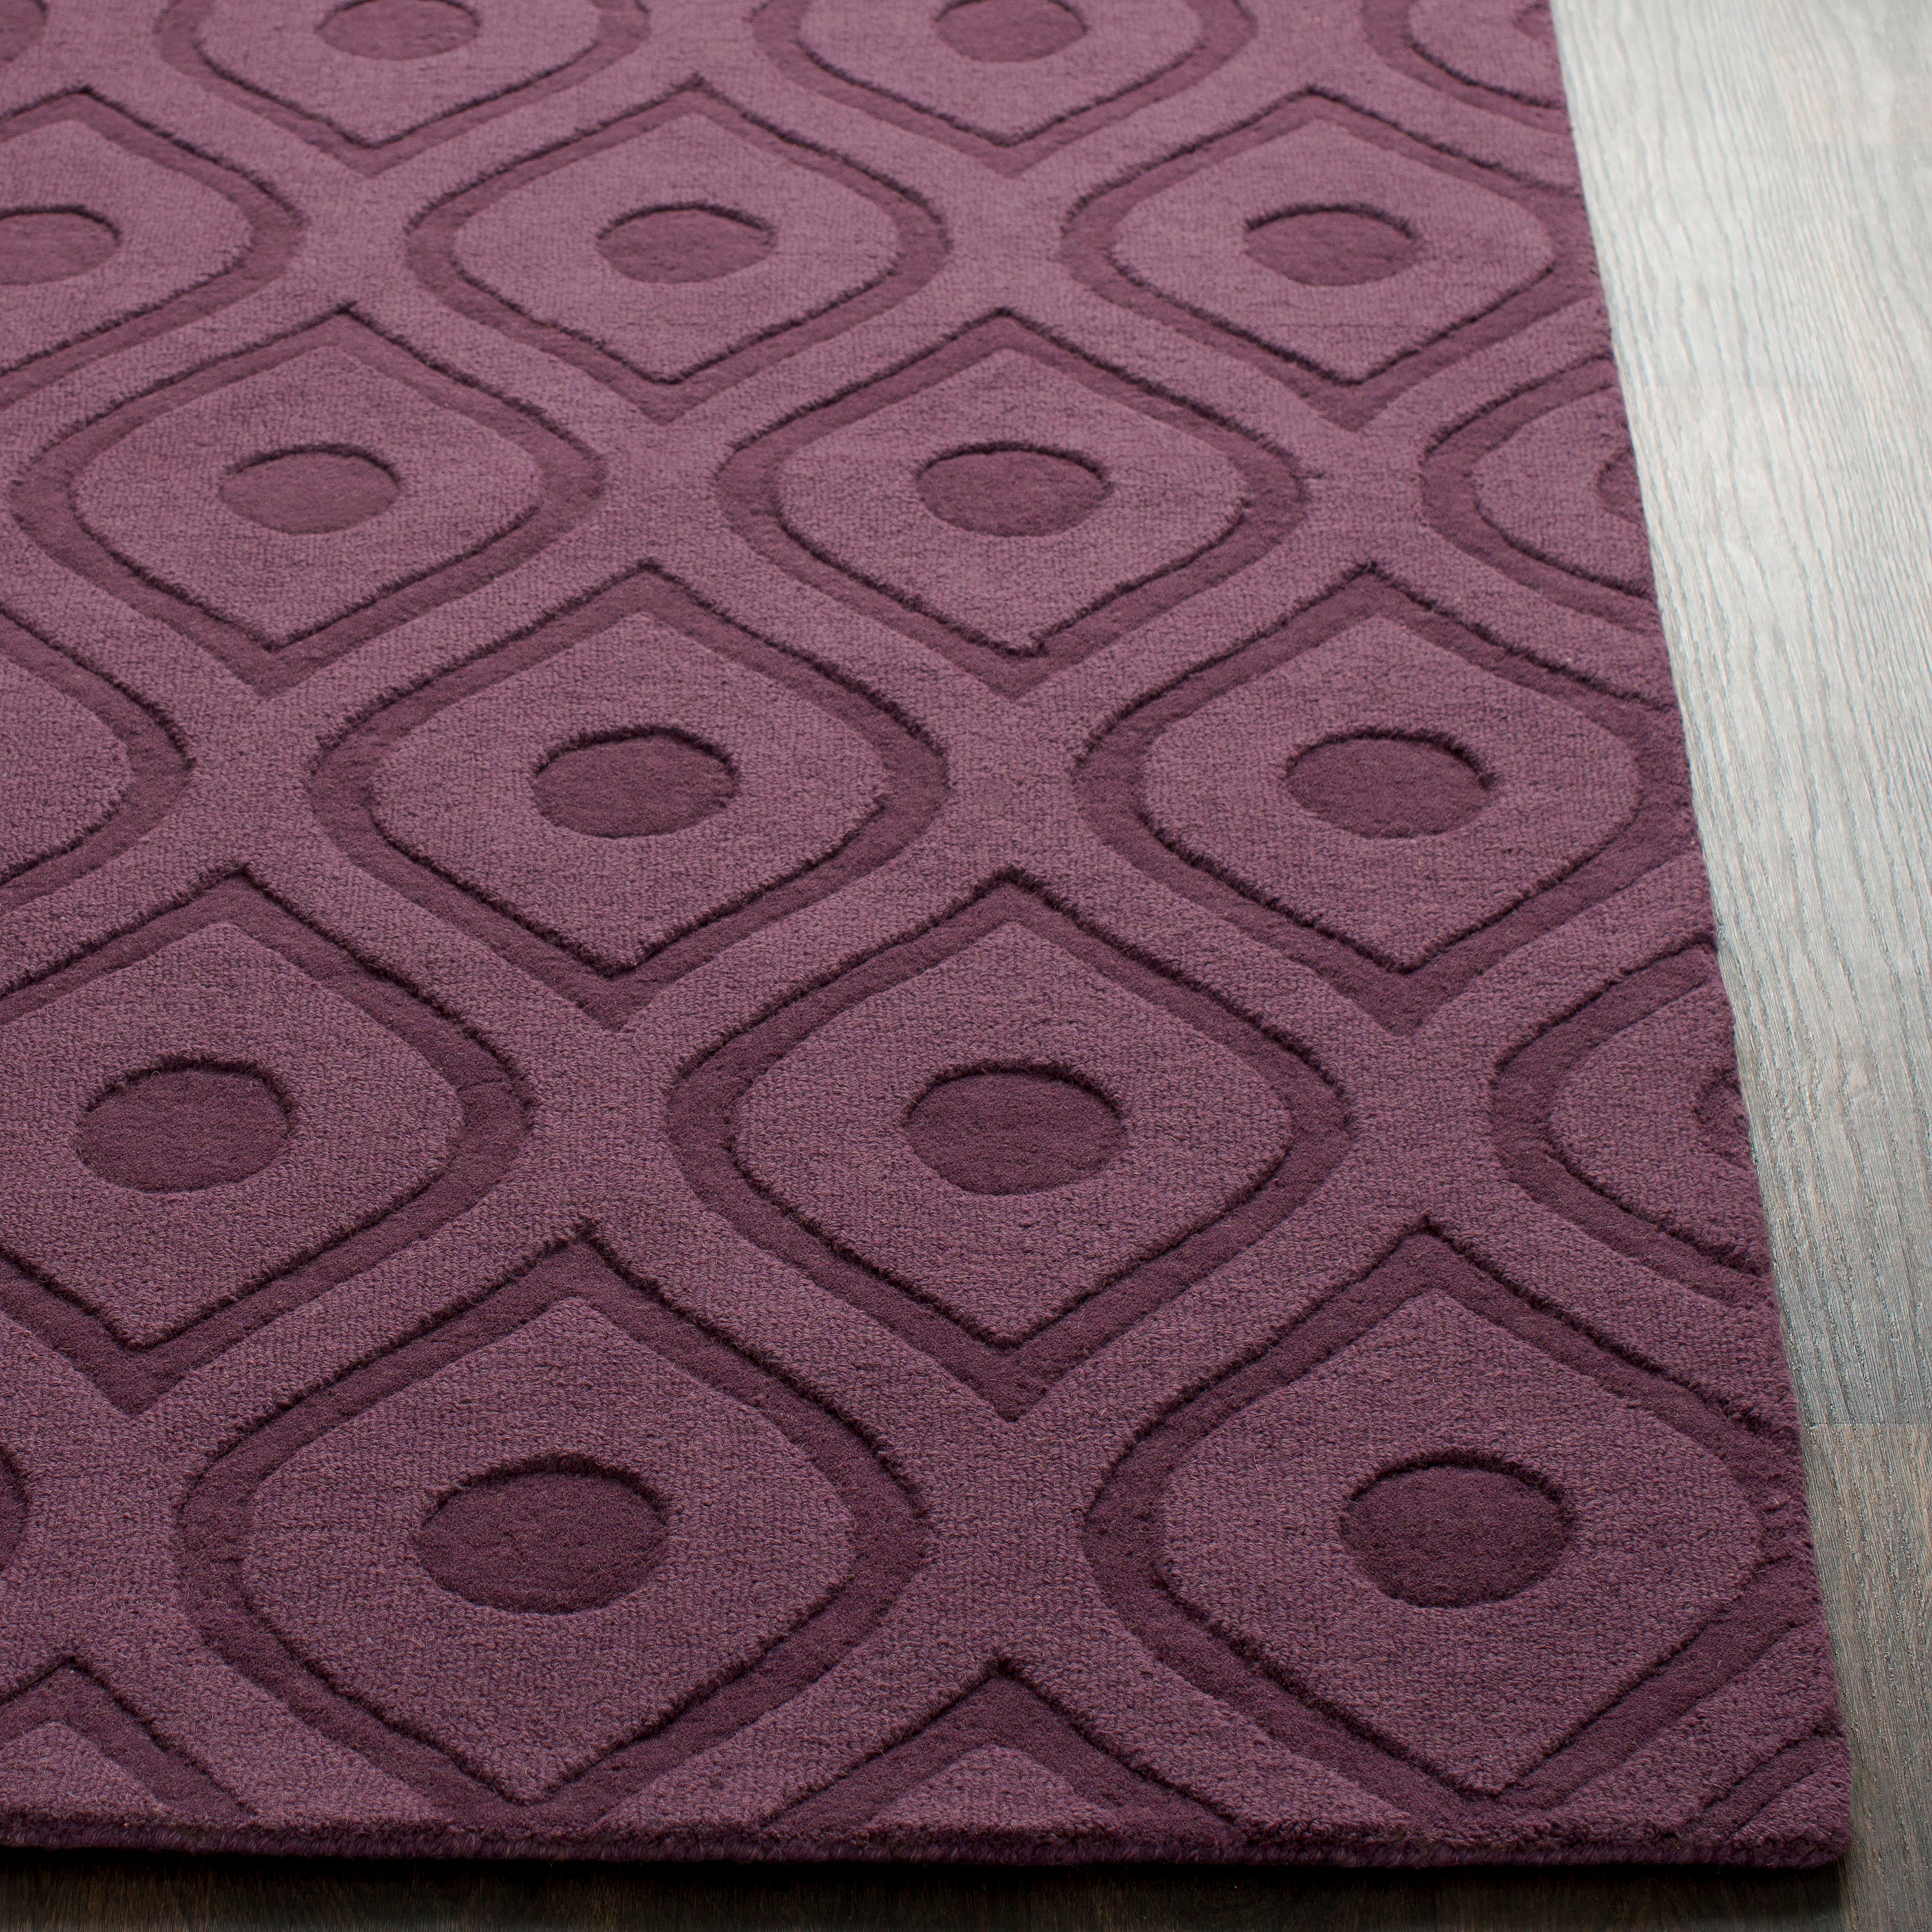 Livabliss Central Park Solid Purple AWHP-4006 Area Rug